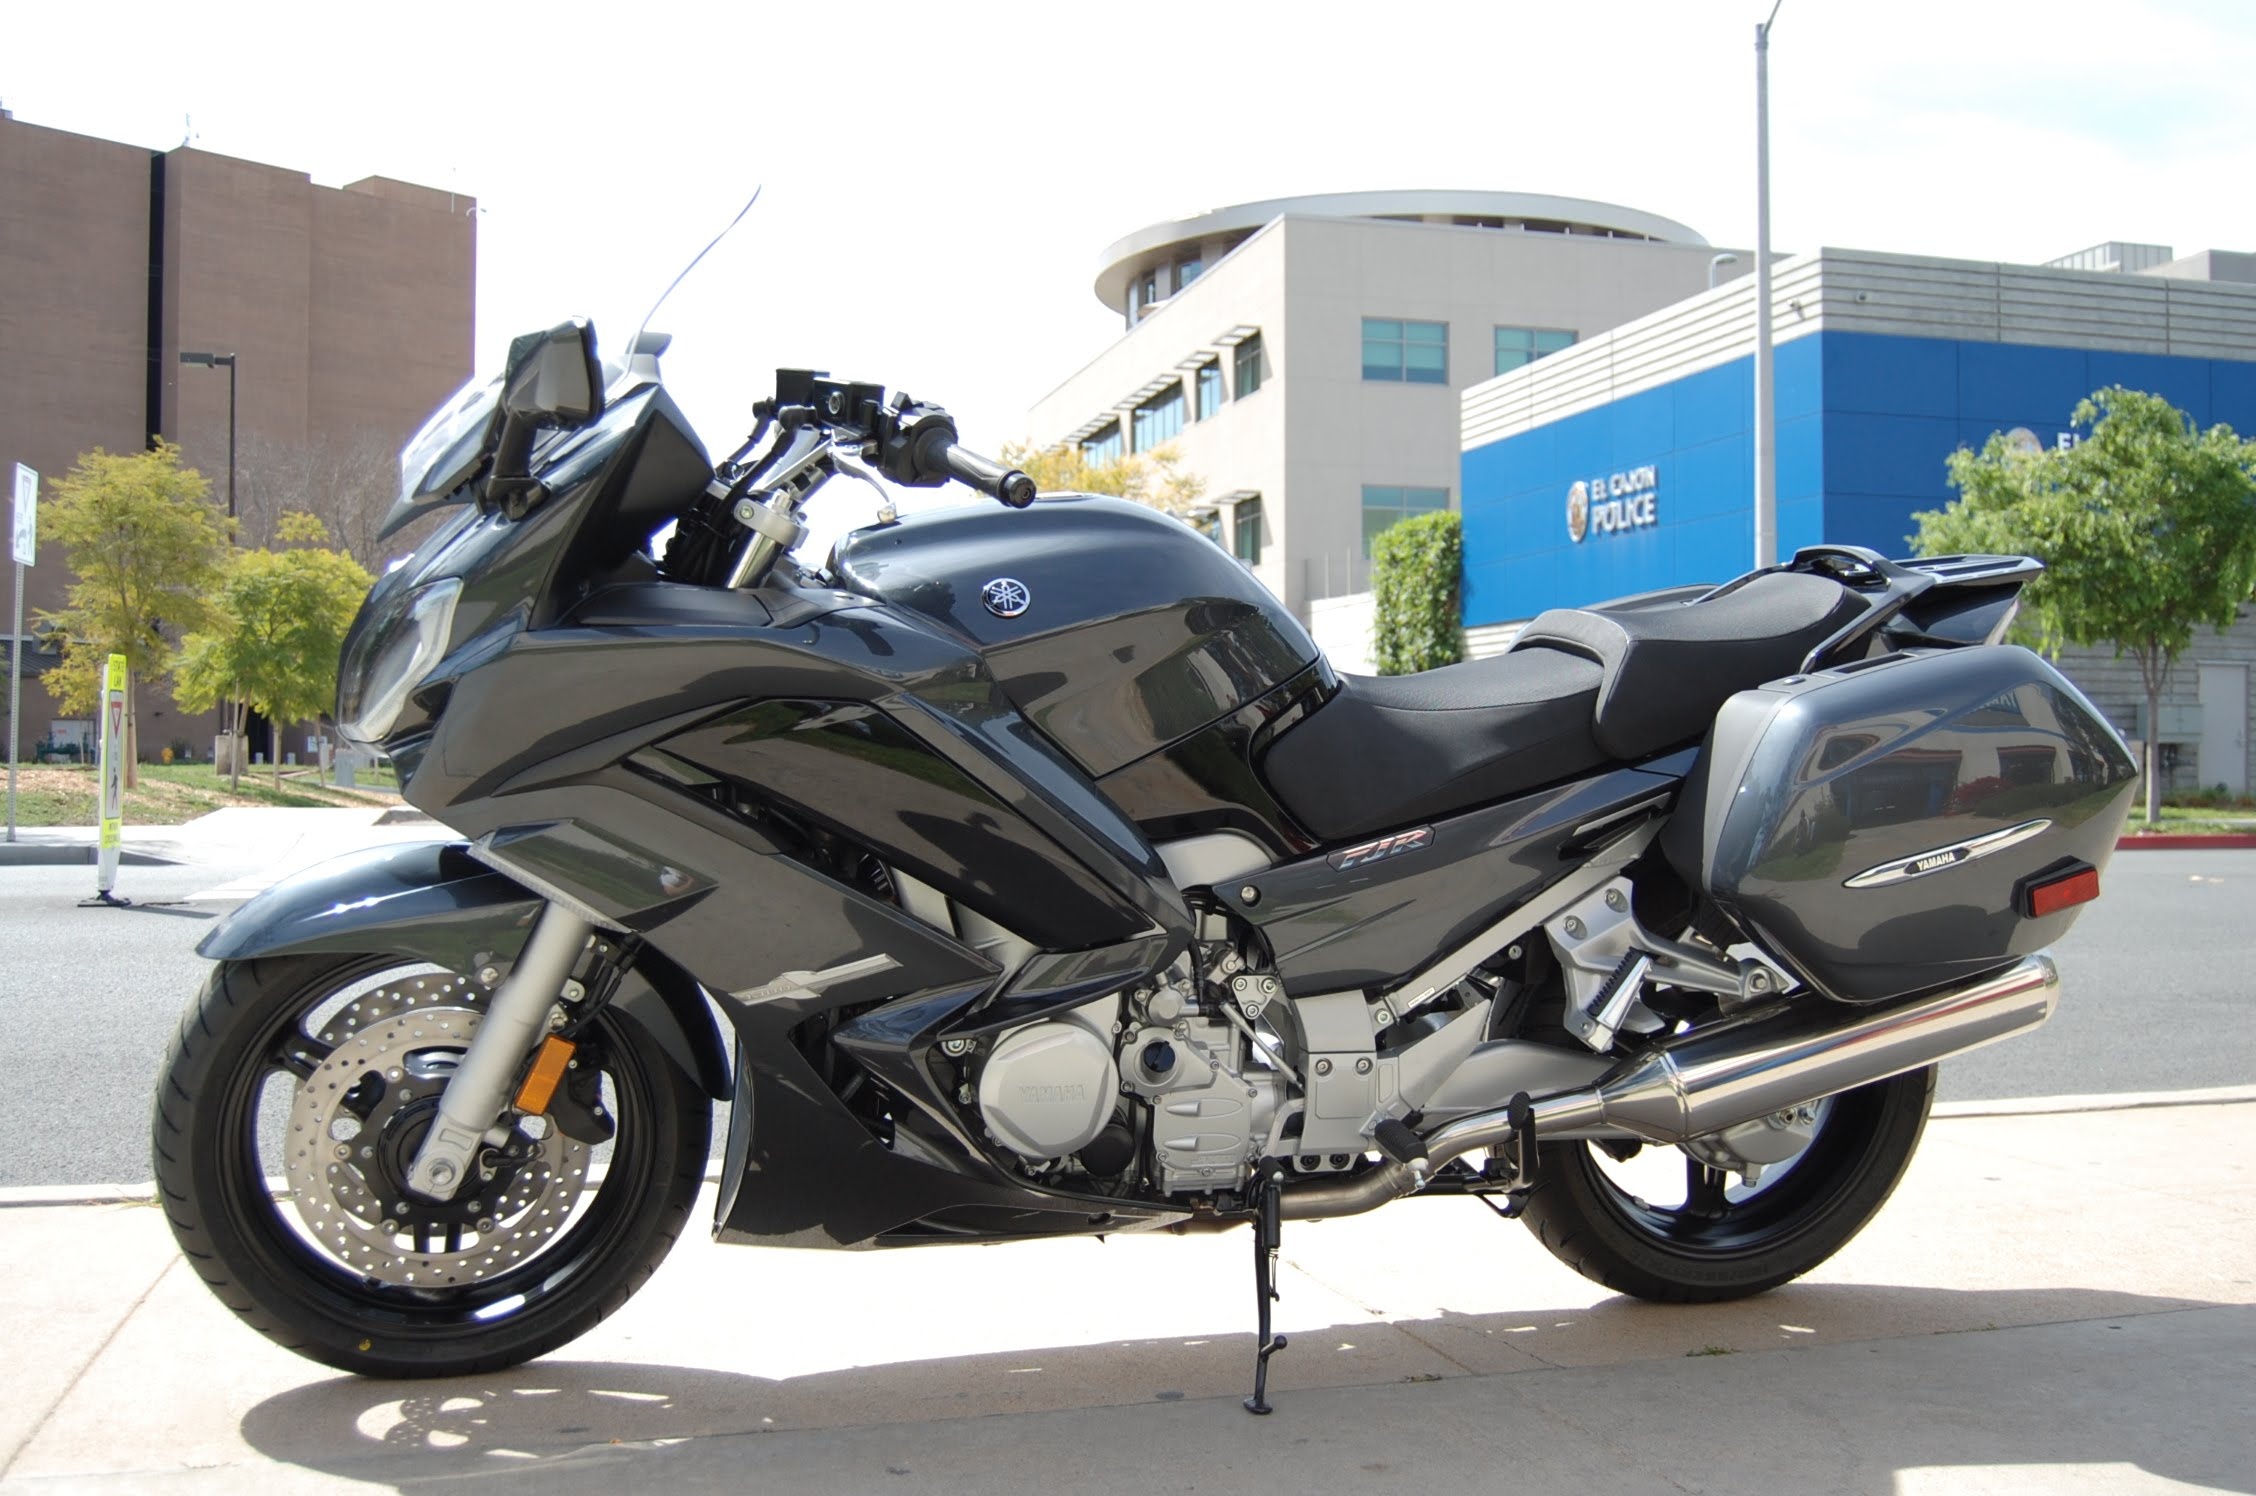 Yamaha FJR1300, Two-wheeled thrill, Ultimate touring motorcycle, Power-packed performance, 2260x1500 HD Desktop